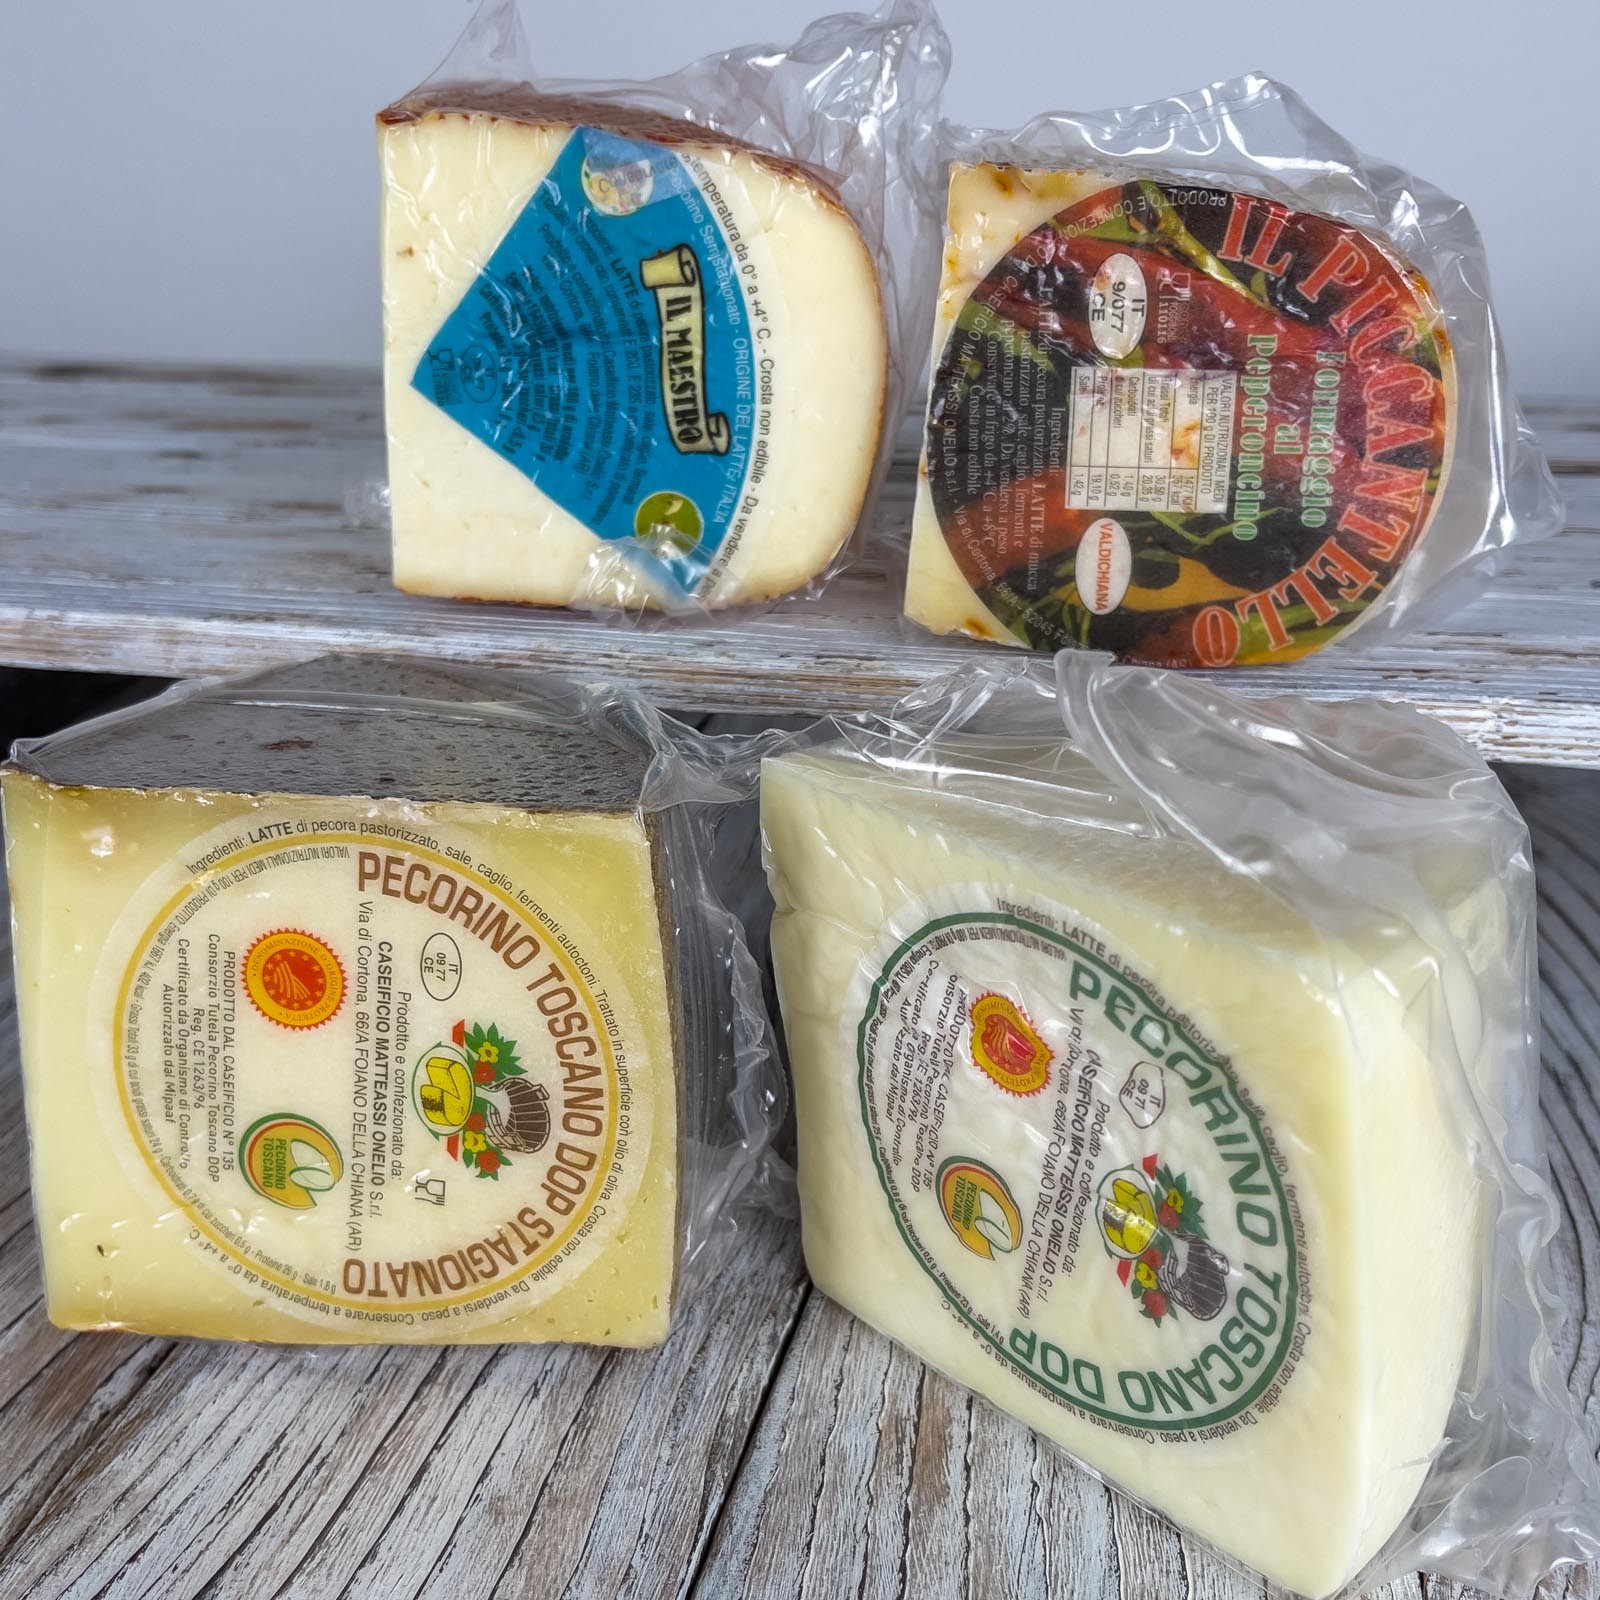 The Tasting Box - “Degustazione Di Formaggi” is made up of a selection of products for a total of about 1.5 kg. Perfect for tasting a perfect variety of Tuscan cheeses.